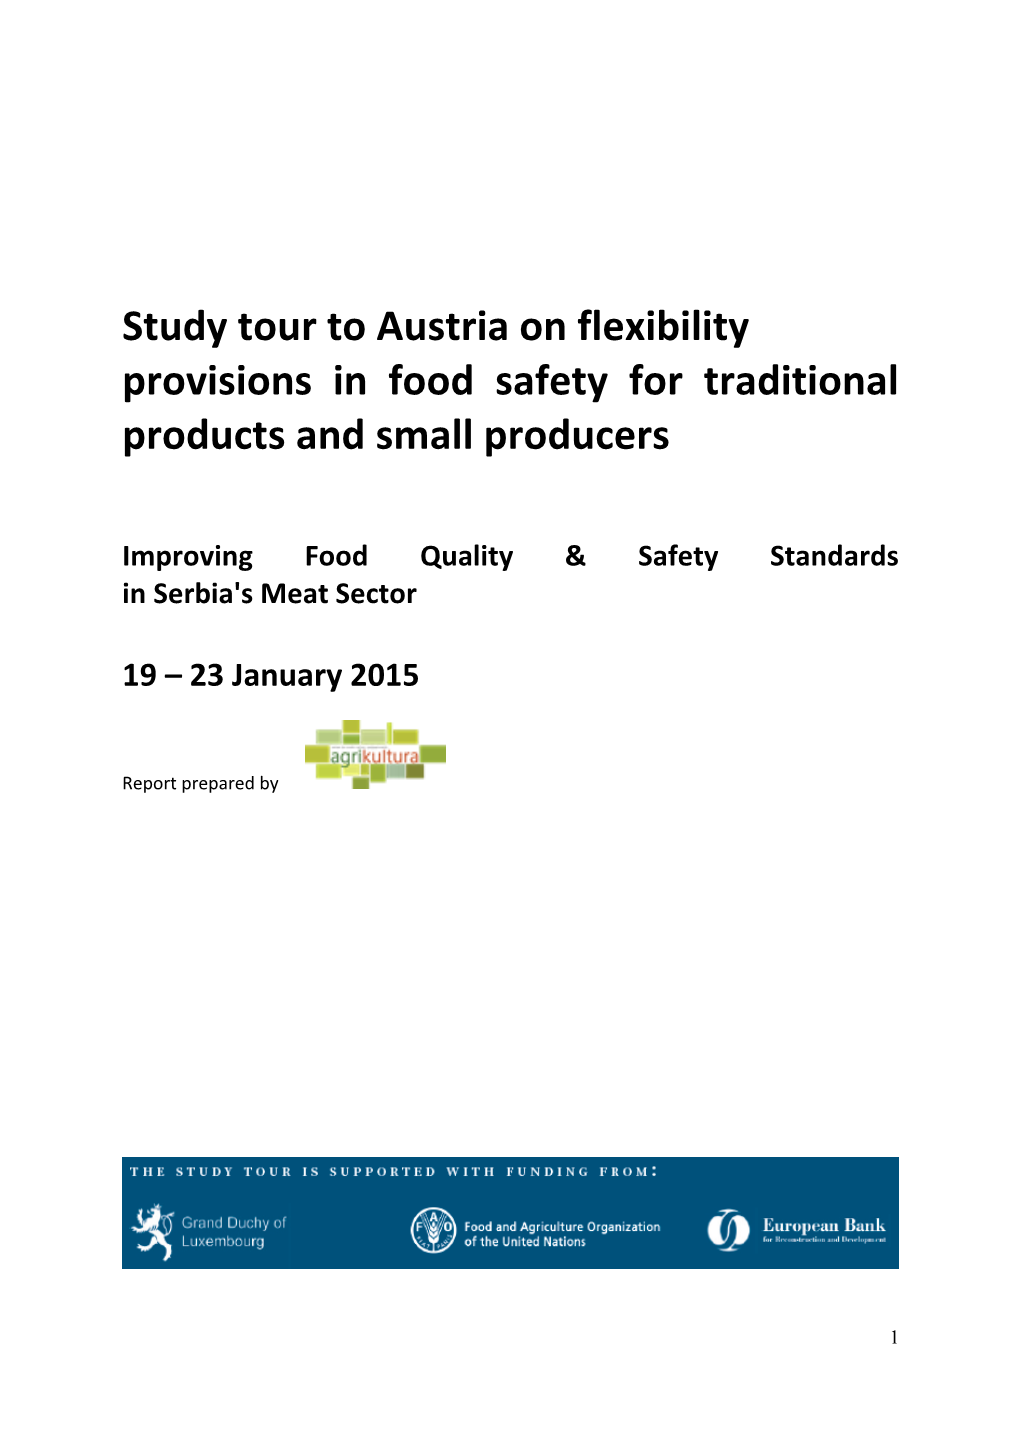 Study Tour to Austria on Flexibility Provisions in Food Safety for Traditional Products and Small Producers